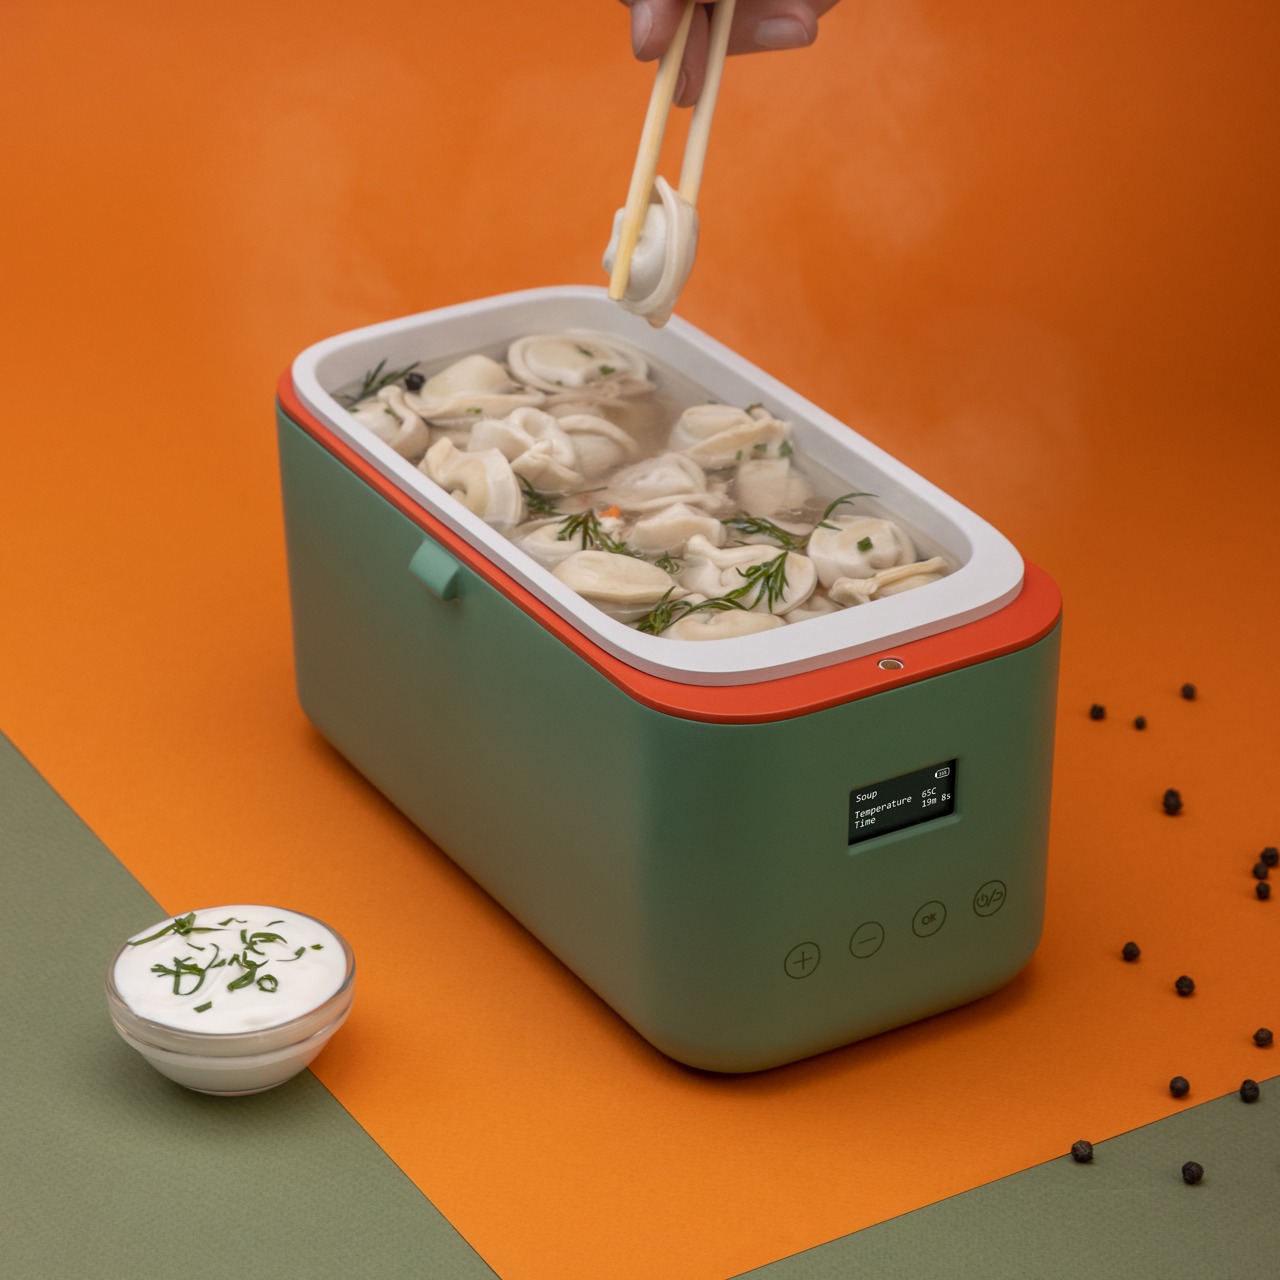 Solar-powered lunchbox keeps your food hot or even cool, depending on  what's inside - Yanko Design